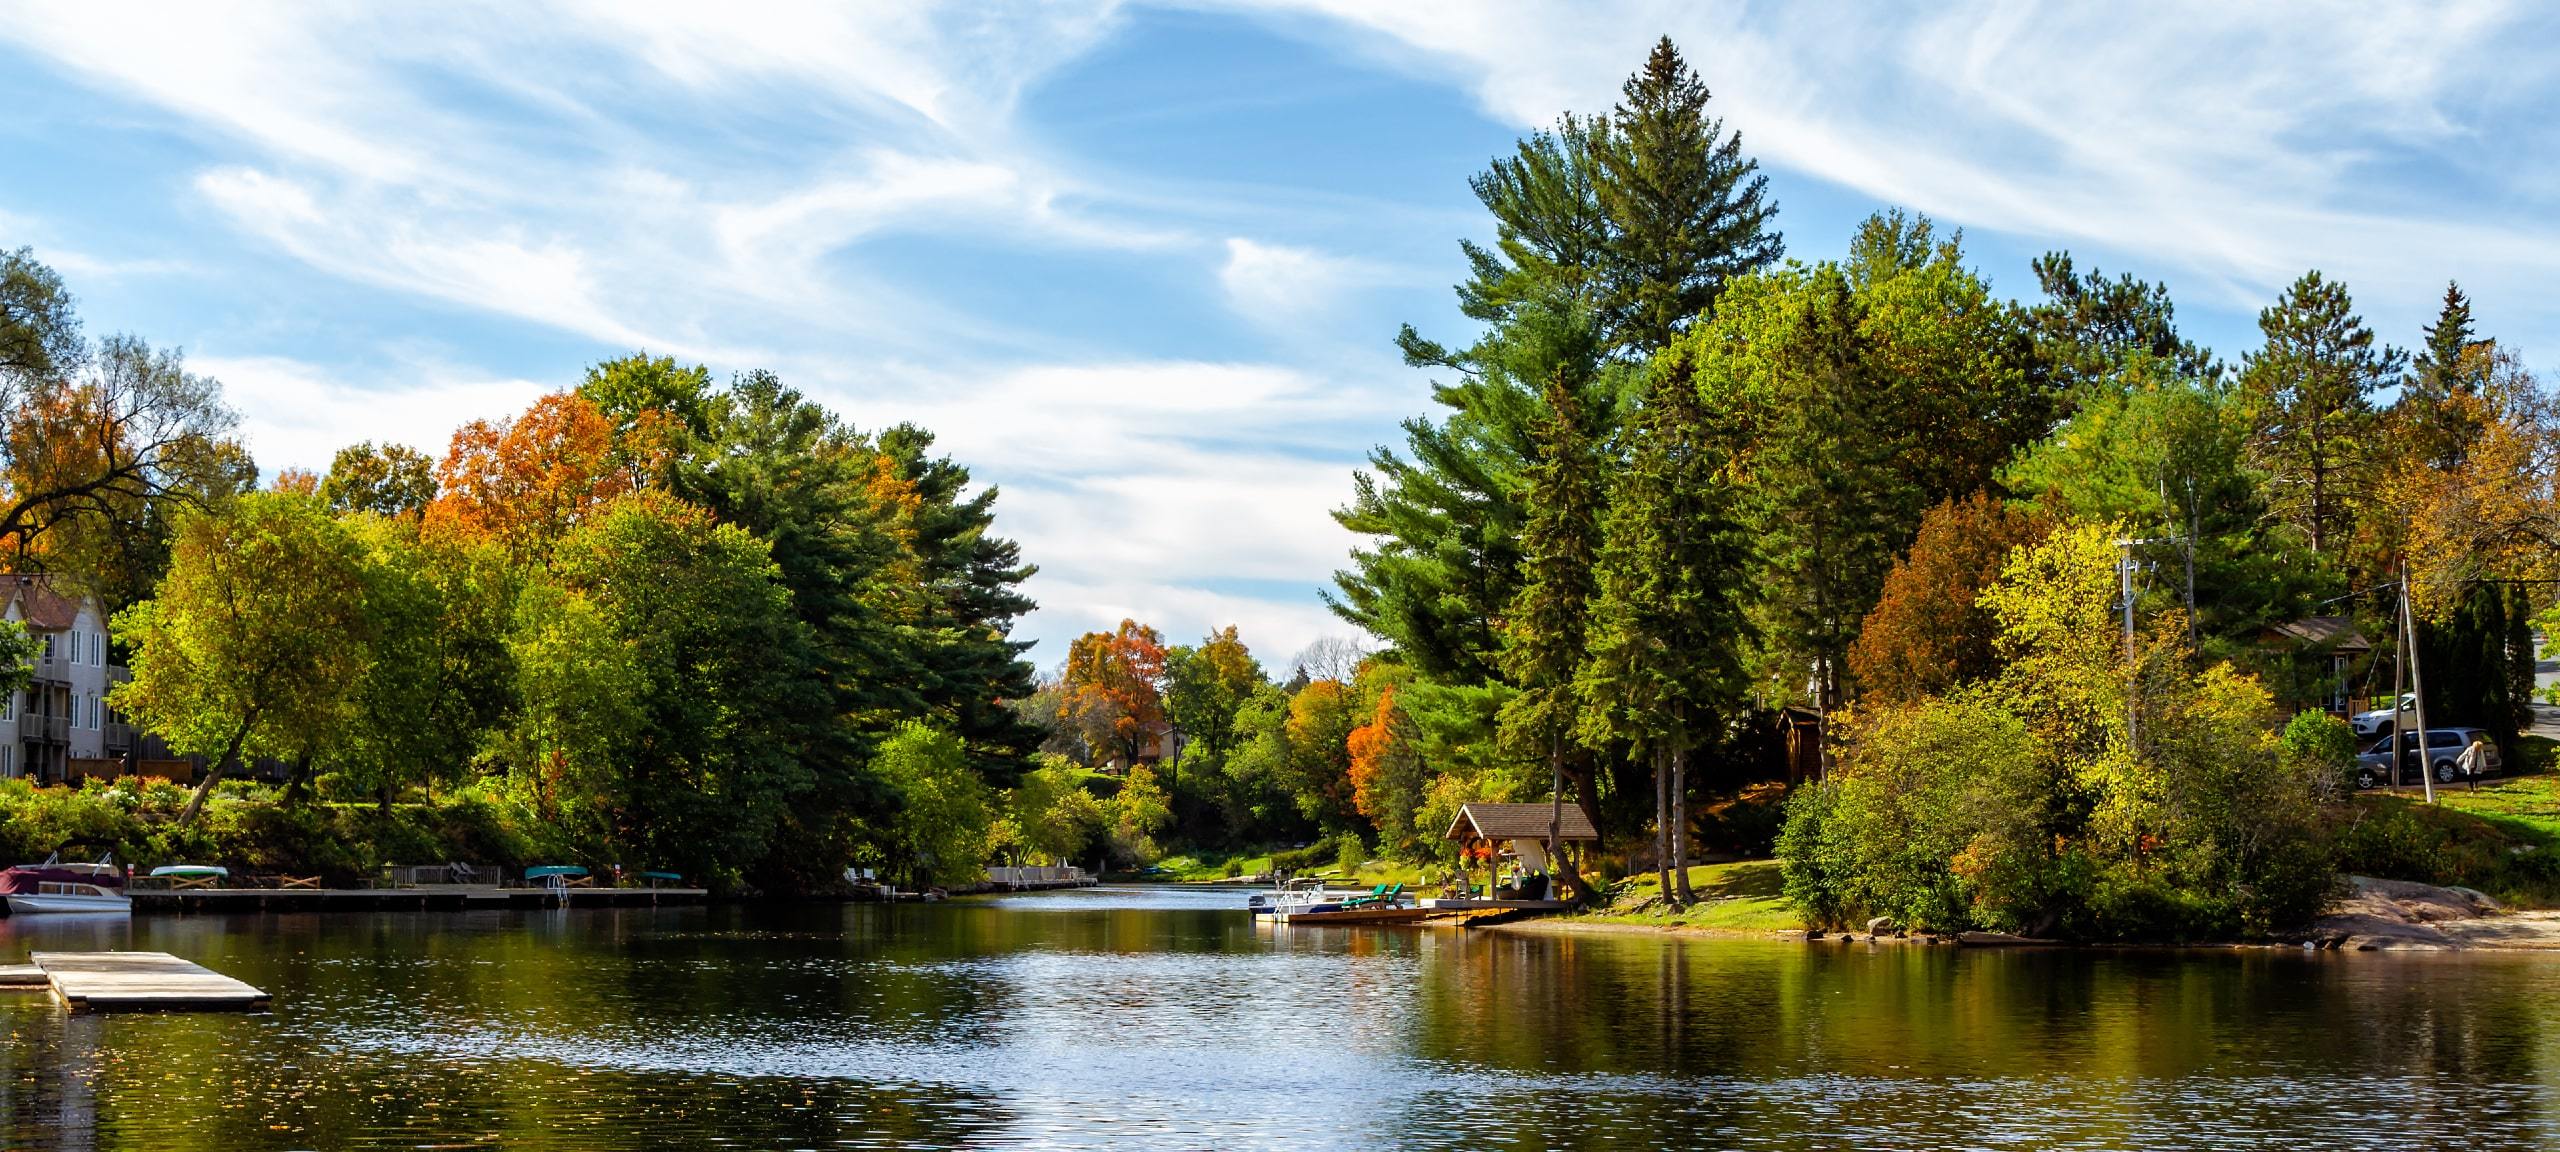 Waterfront homes and autumn trees in Bracebridge, ON